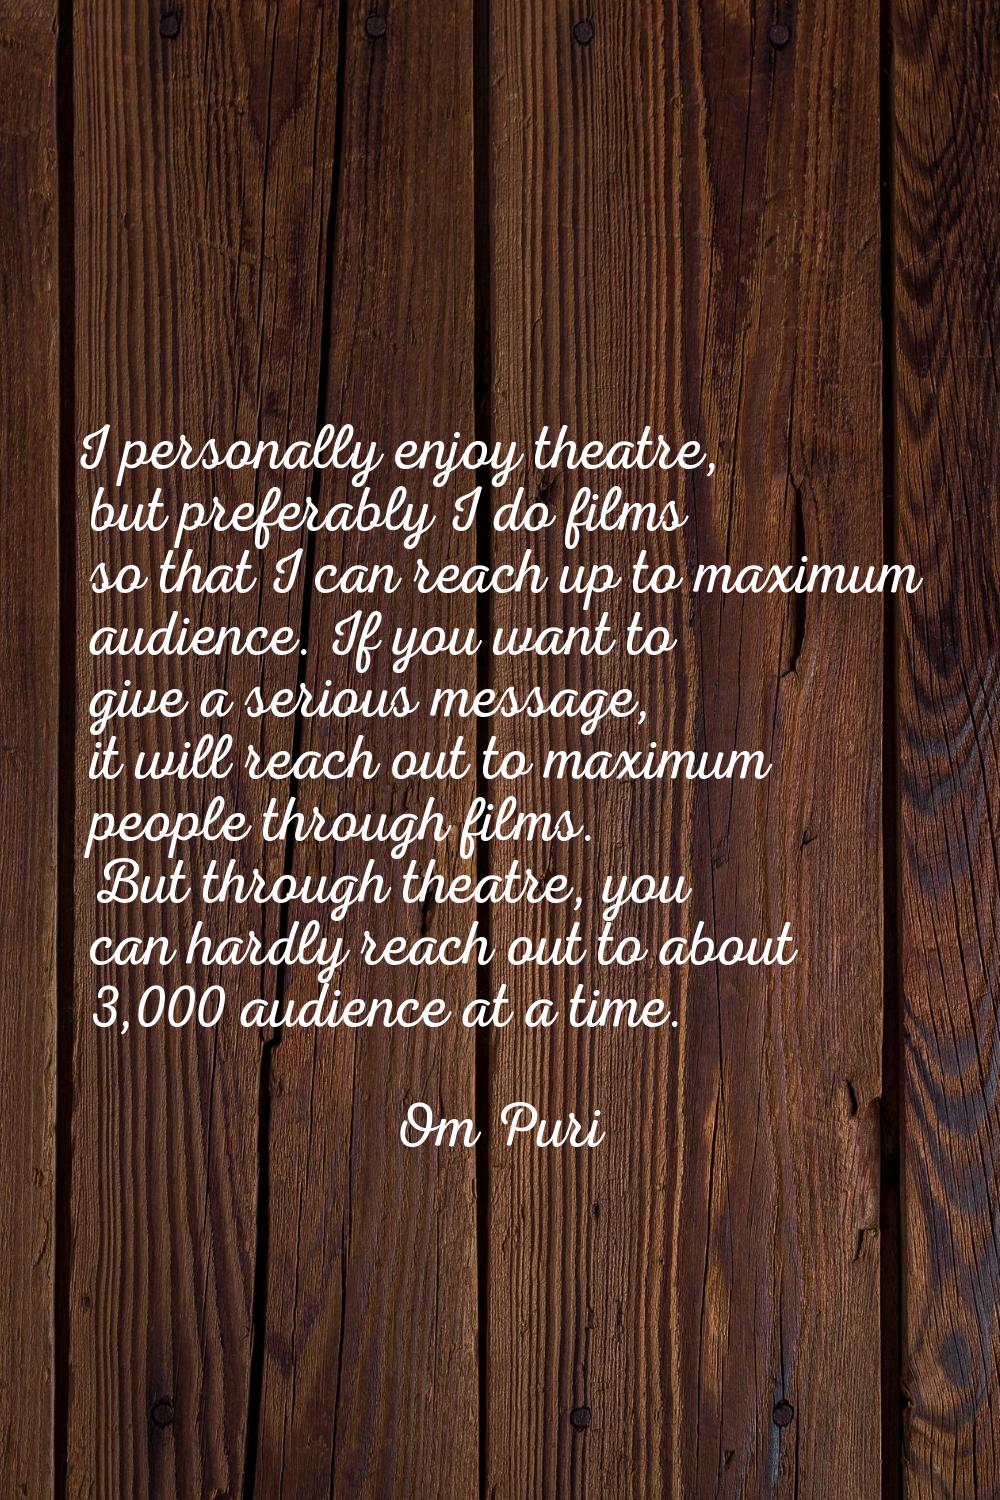 I personally enjoy theatre, but preferably I do films so that I can reach up to maximum audience. I